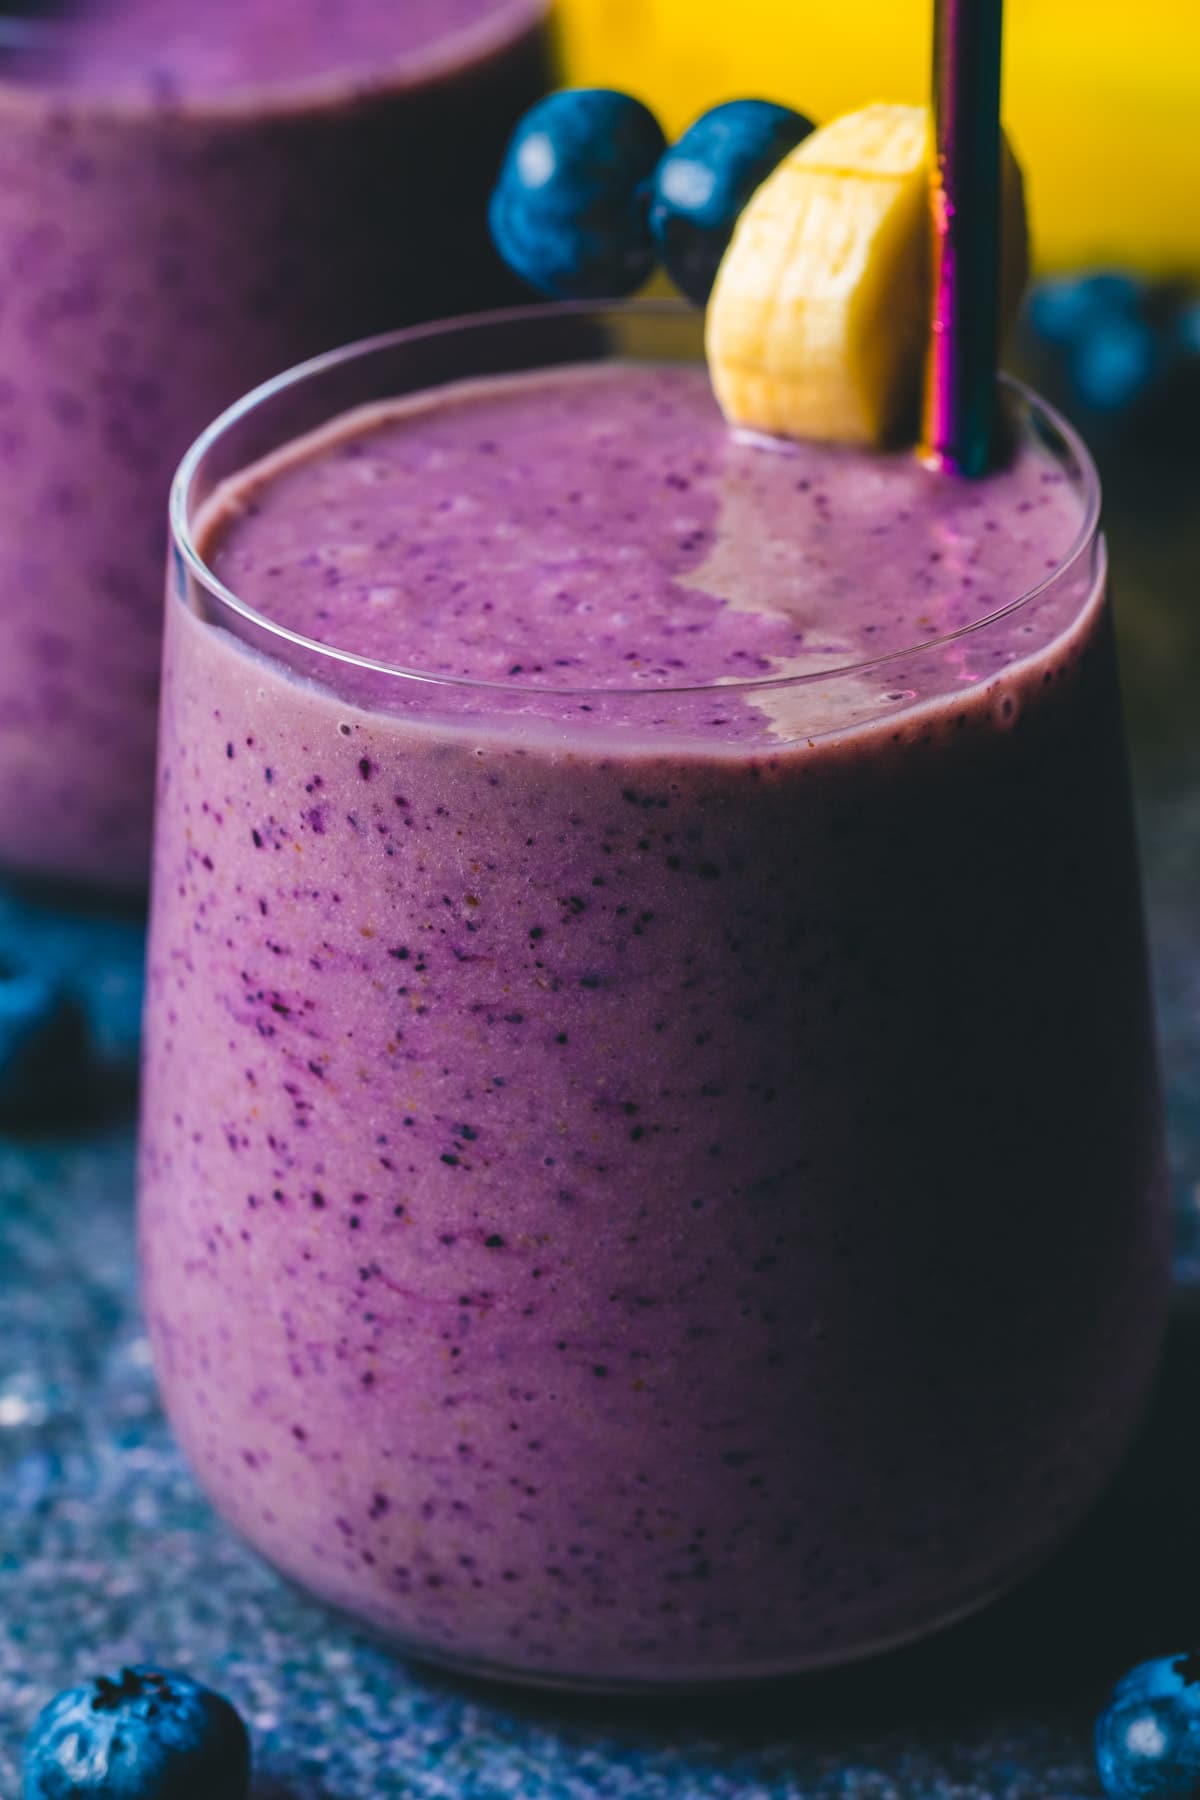 Blueberry banana smoothie in a glass with a straw.